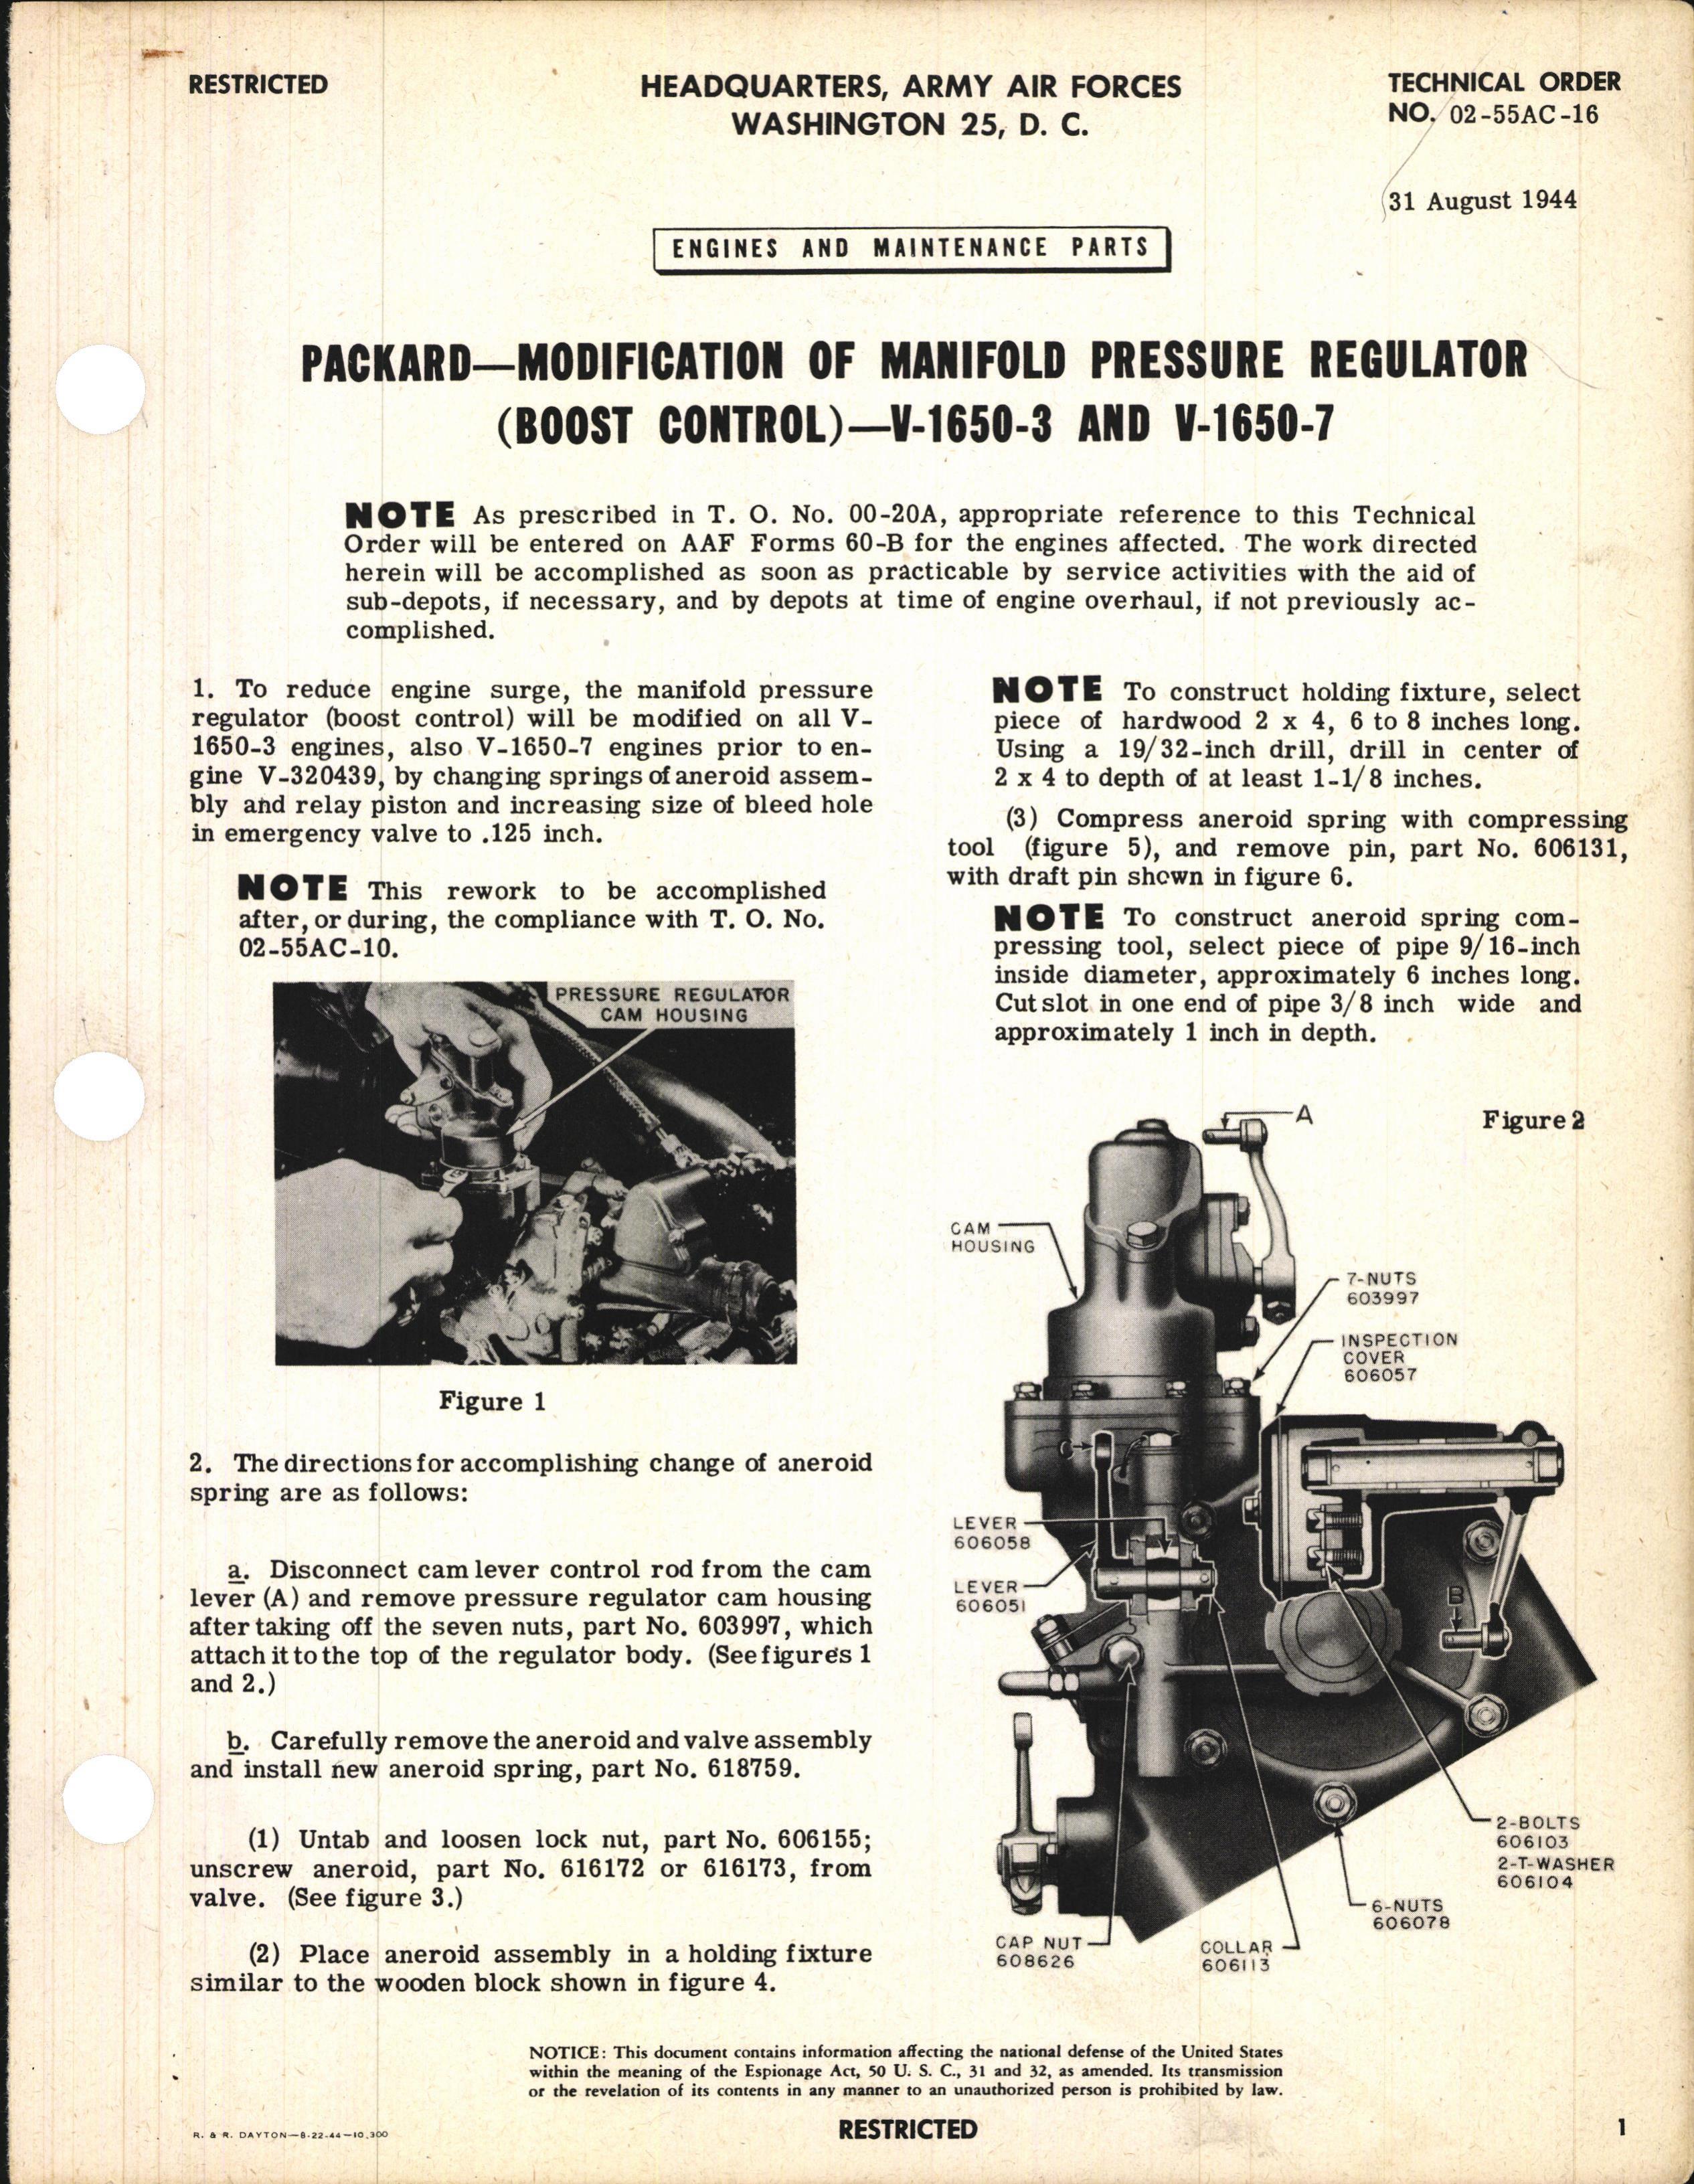 Sample page 1 from AirCorps Library document: Modification of Manifold Pressure Regulator (Boost Control) for V-1650-3 and -7